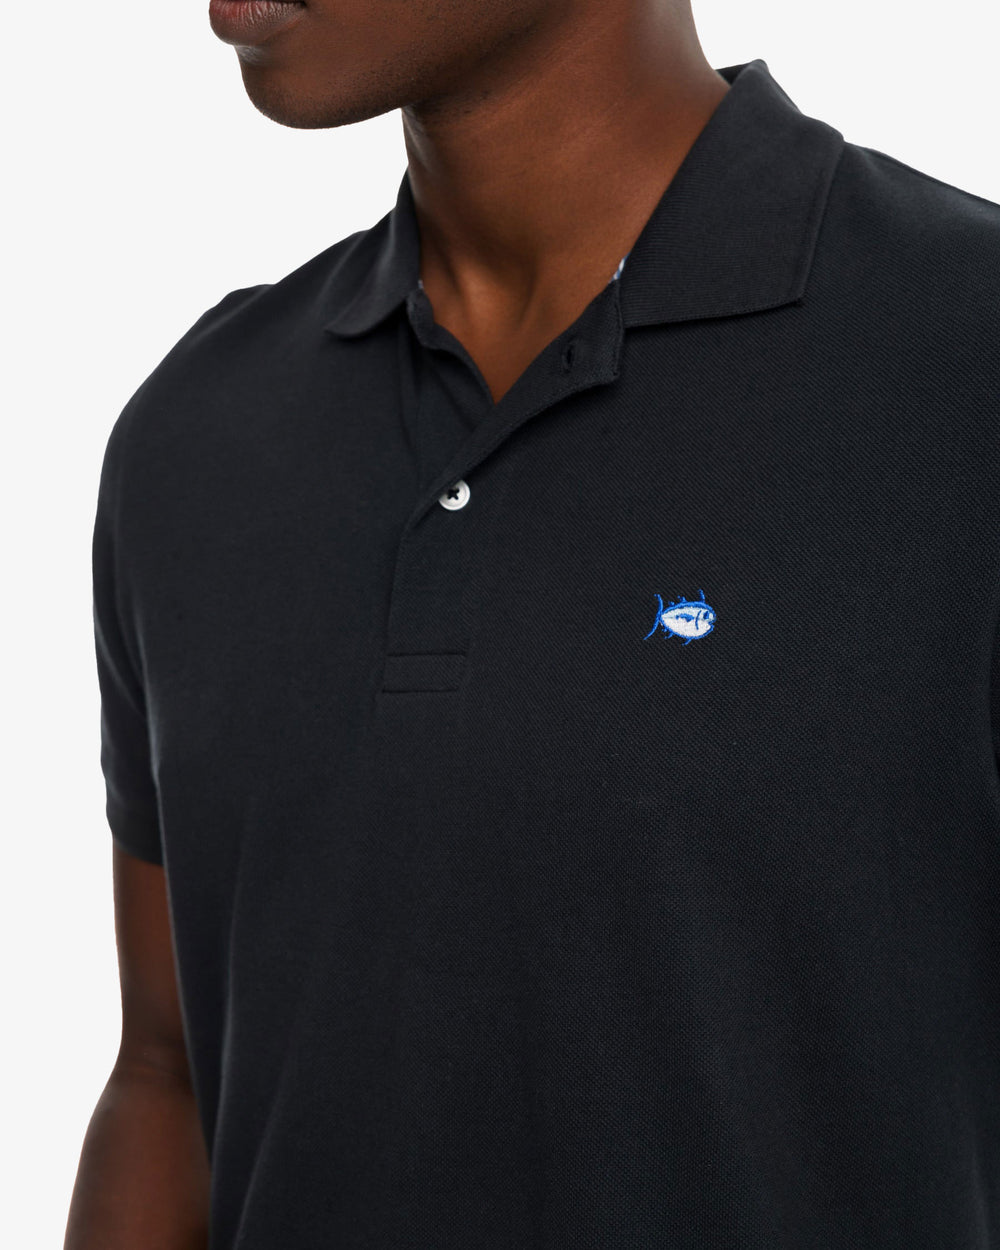 The model detail view of the Men's New Skipjack Polo Shirt by Southern Tide - Midnight Black